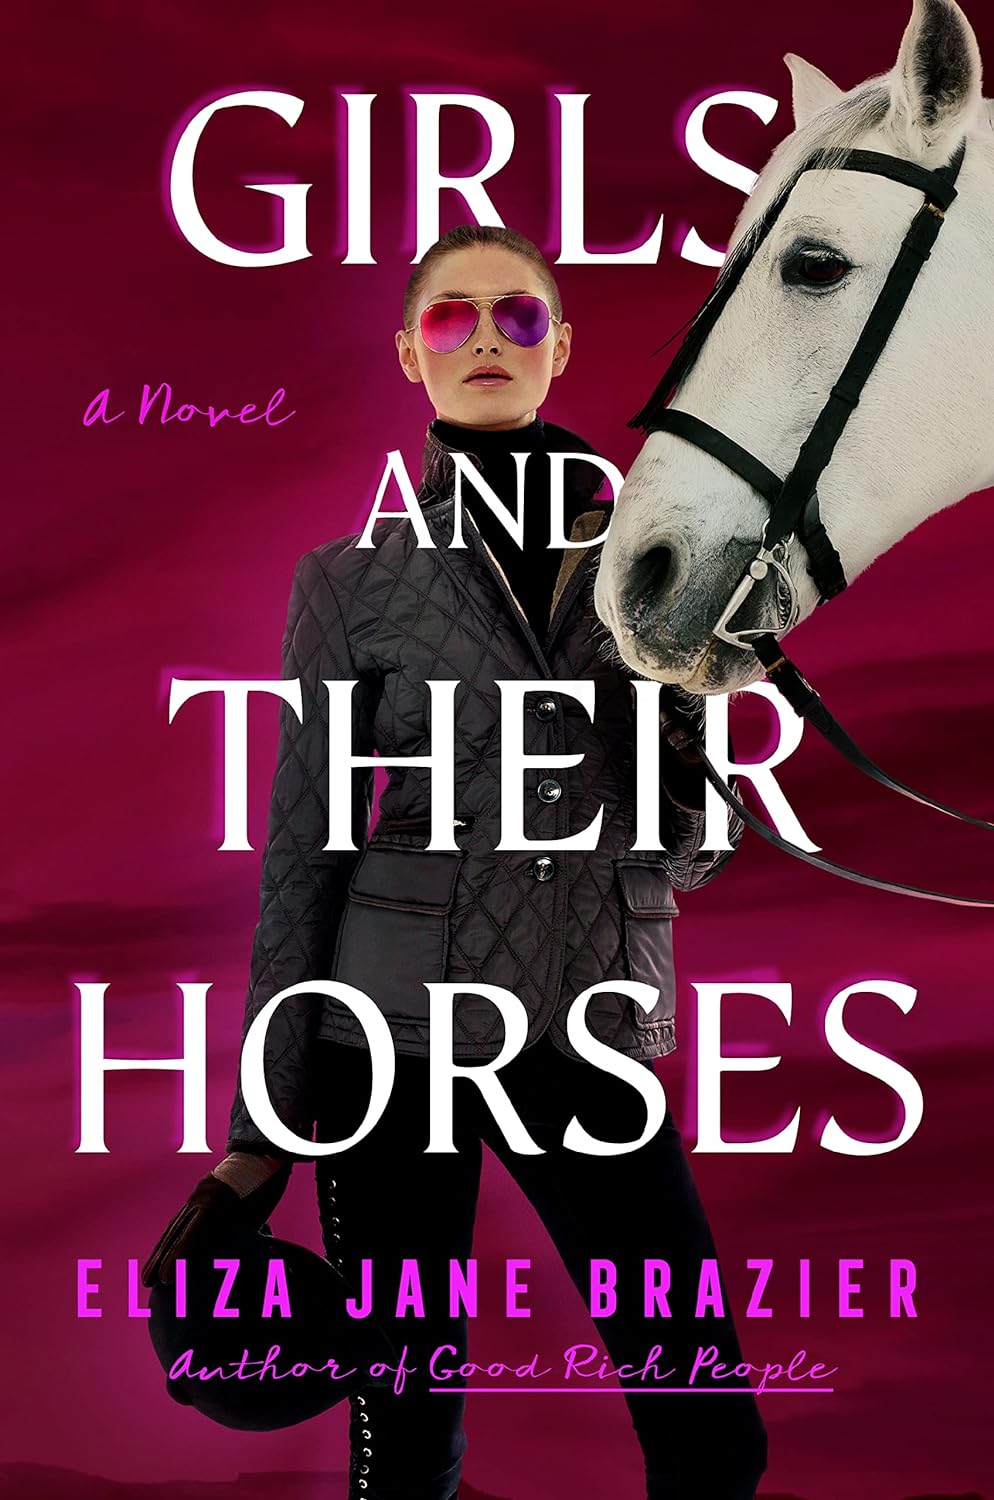 Image for "Girls and Their Horses"